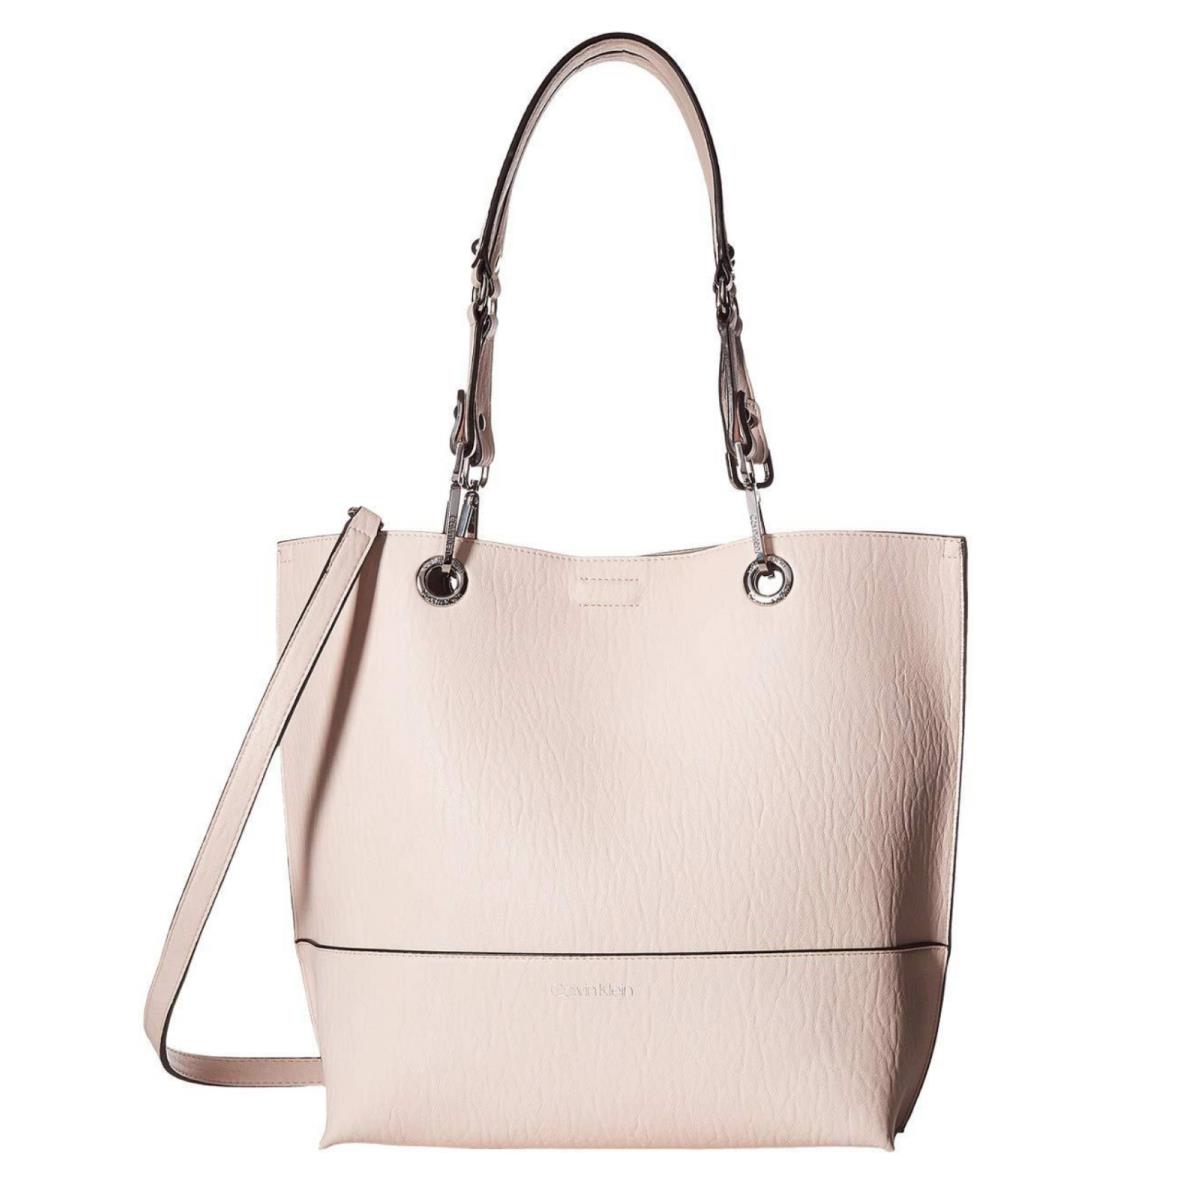 Calvin Klein Sonoma Reversible Tote with Pouch in Powder Pink/wheat/silver - Exterior: Pink